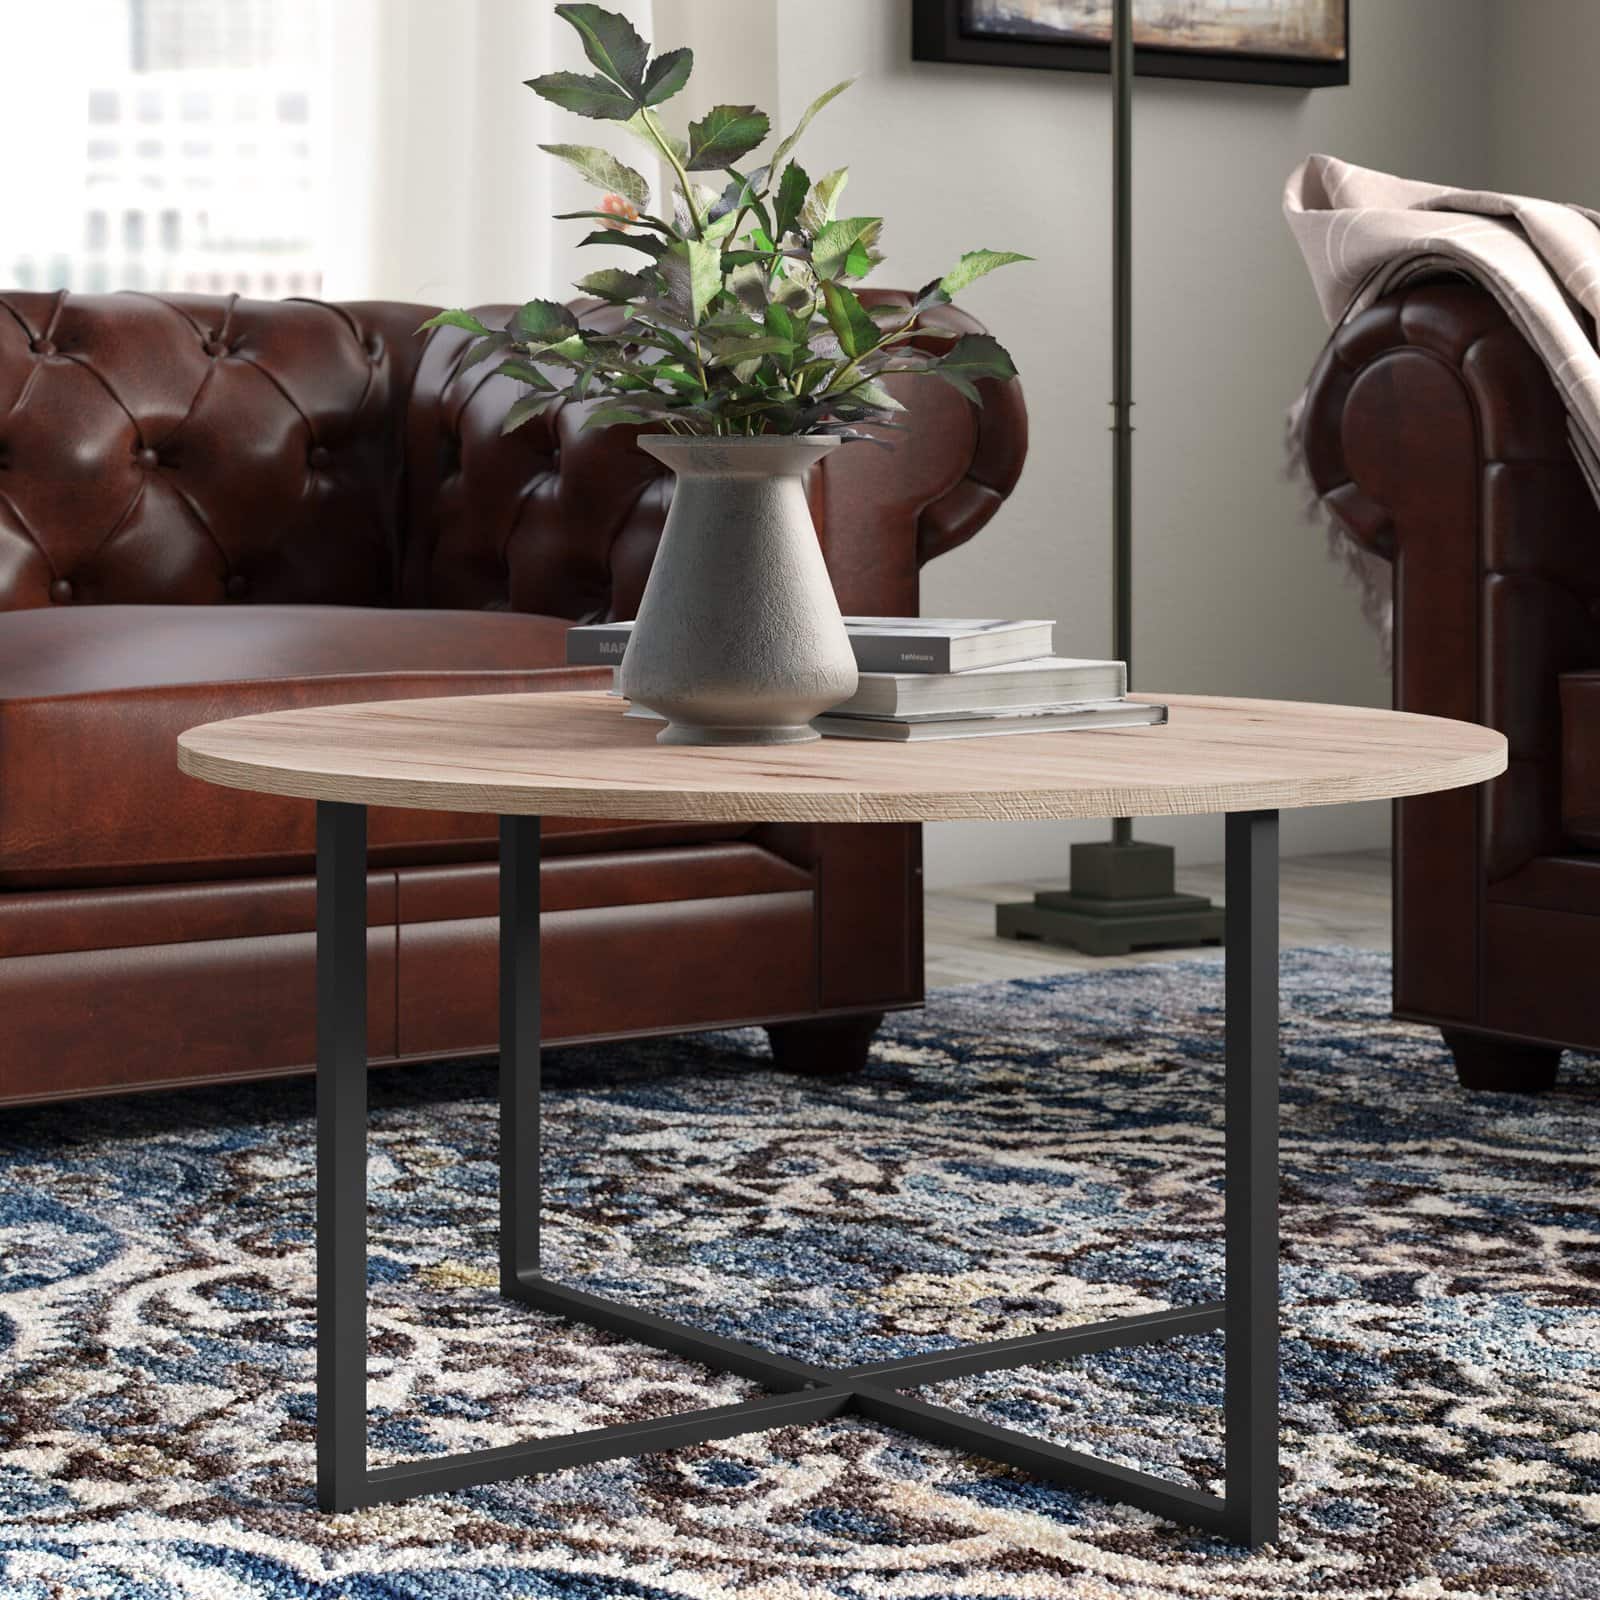 Keep it Simple with a Basic Round Table